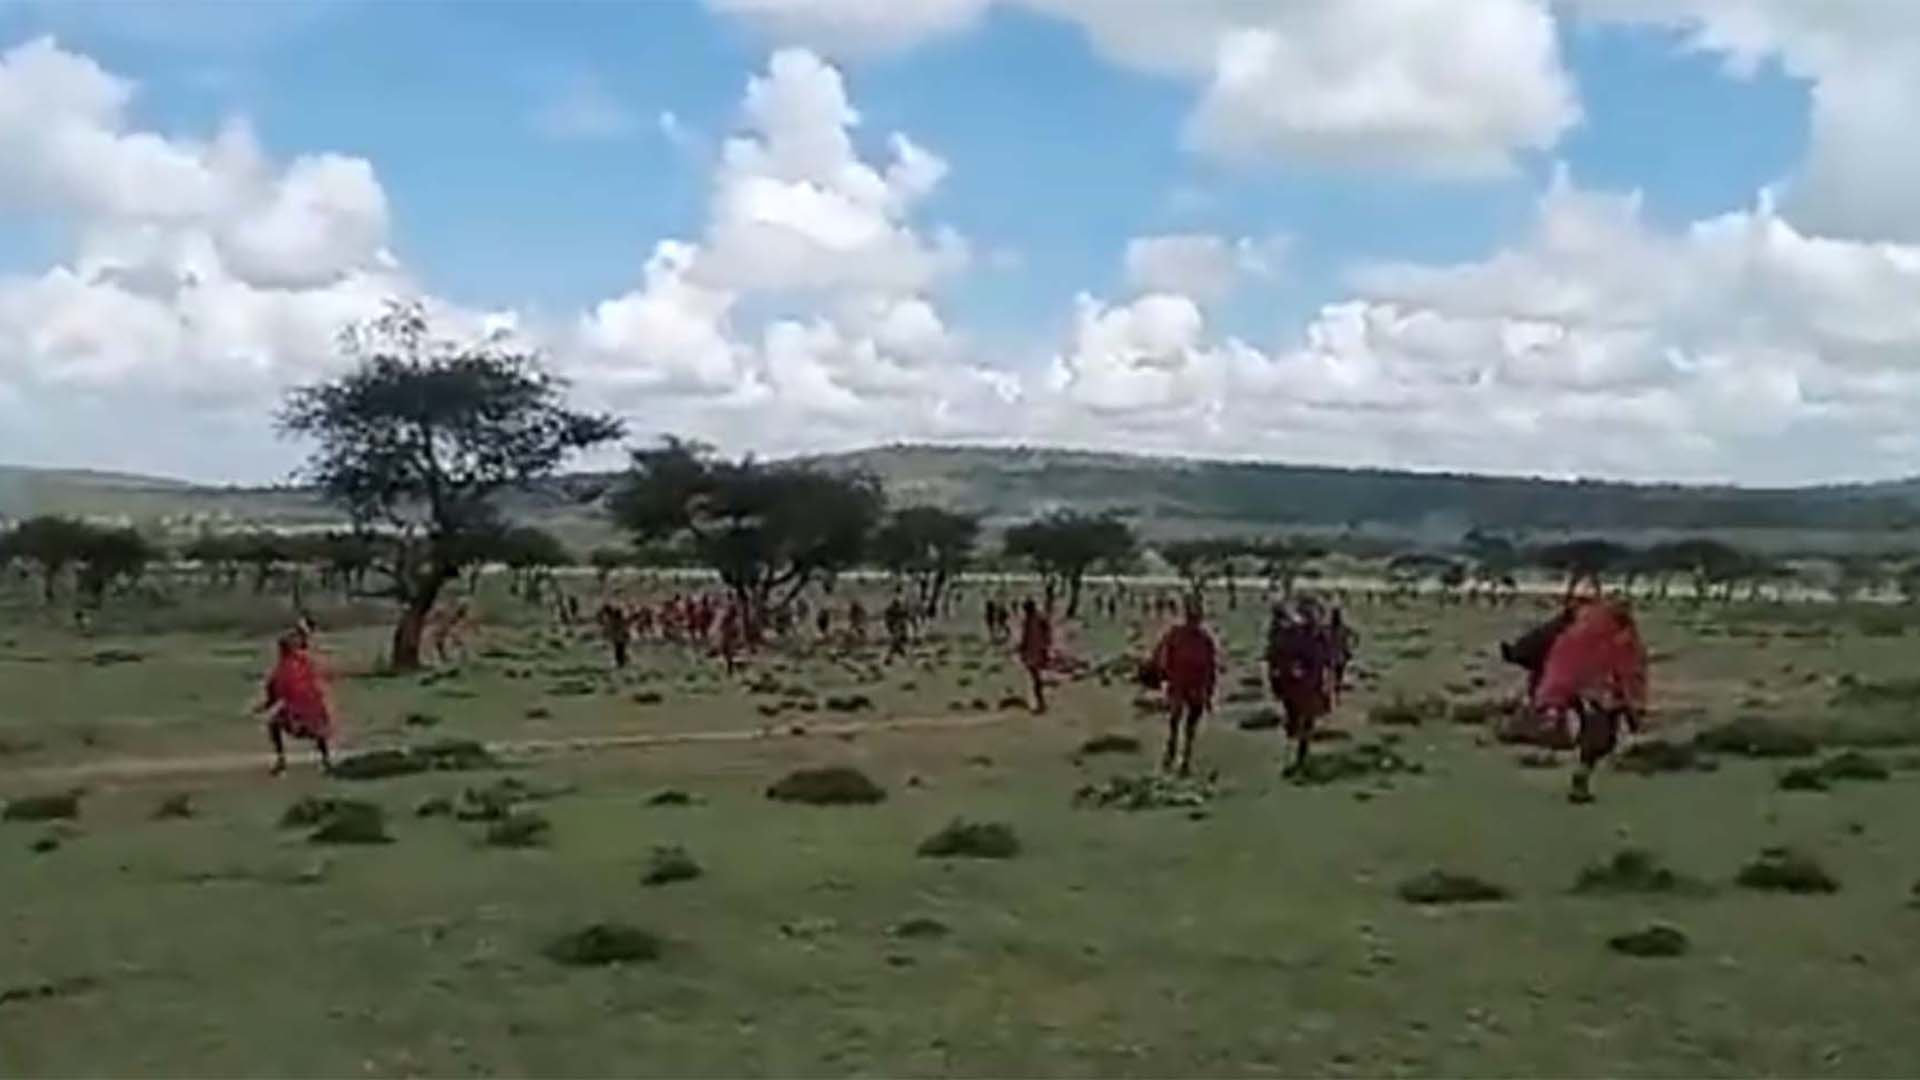 Tanzania: The Government Of Tanzania Must Immediately Stop Violence Against The Maasai People In Loliondo And Conduct A Dialogue Respecting Their Rights